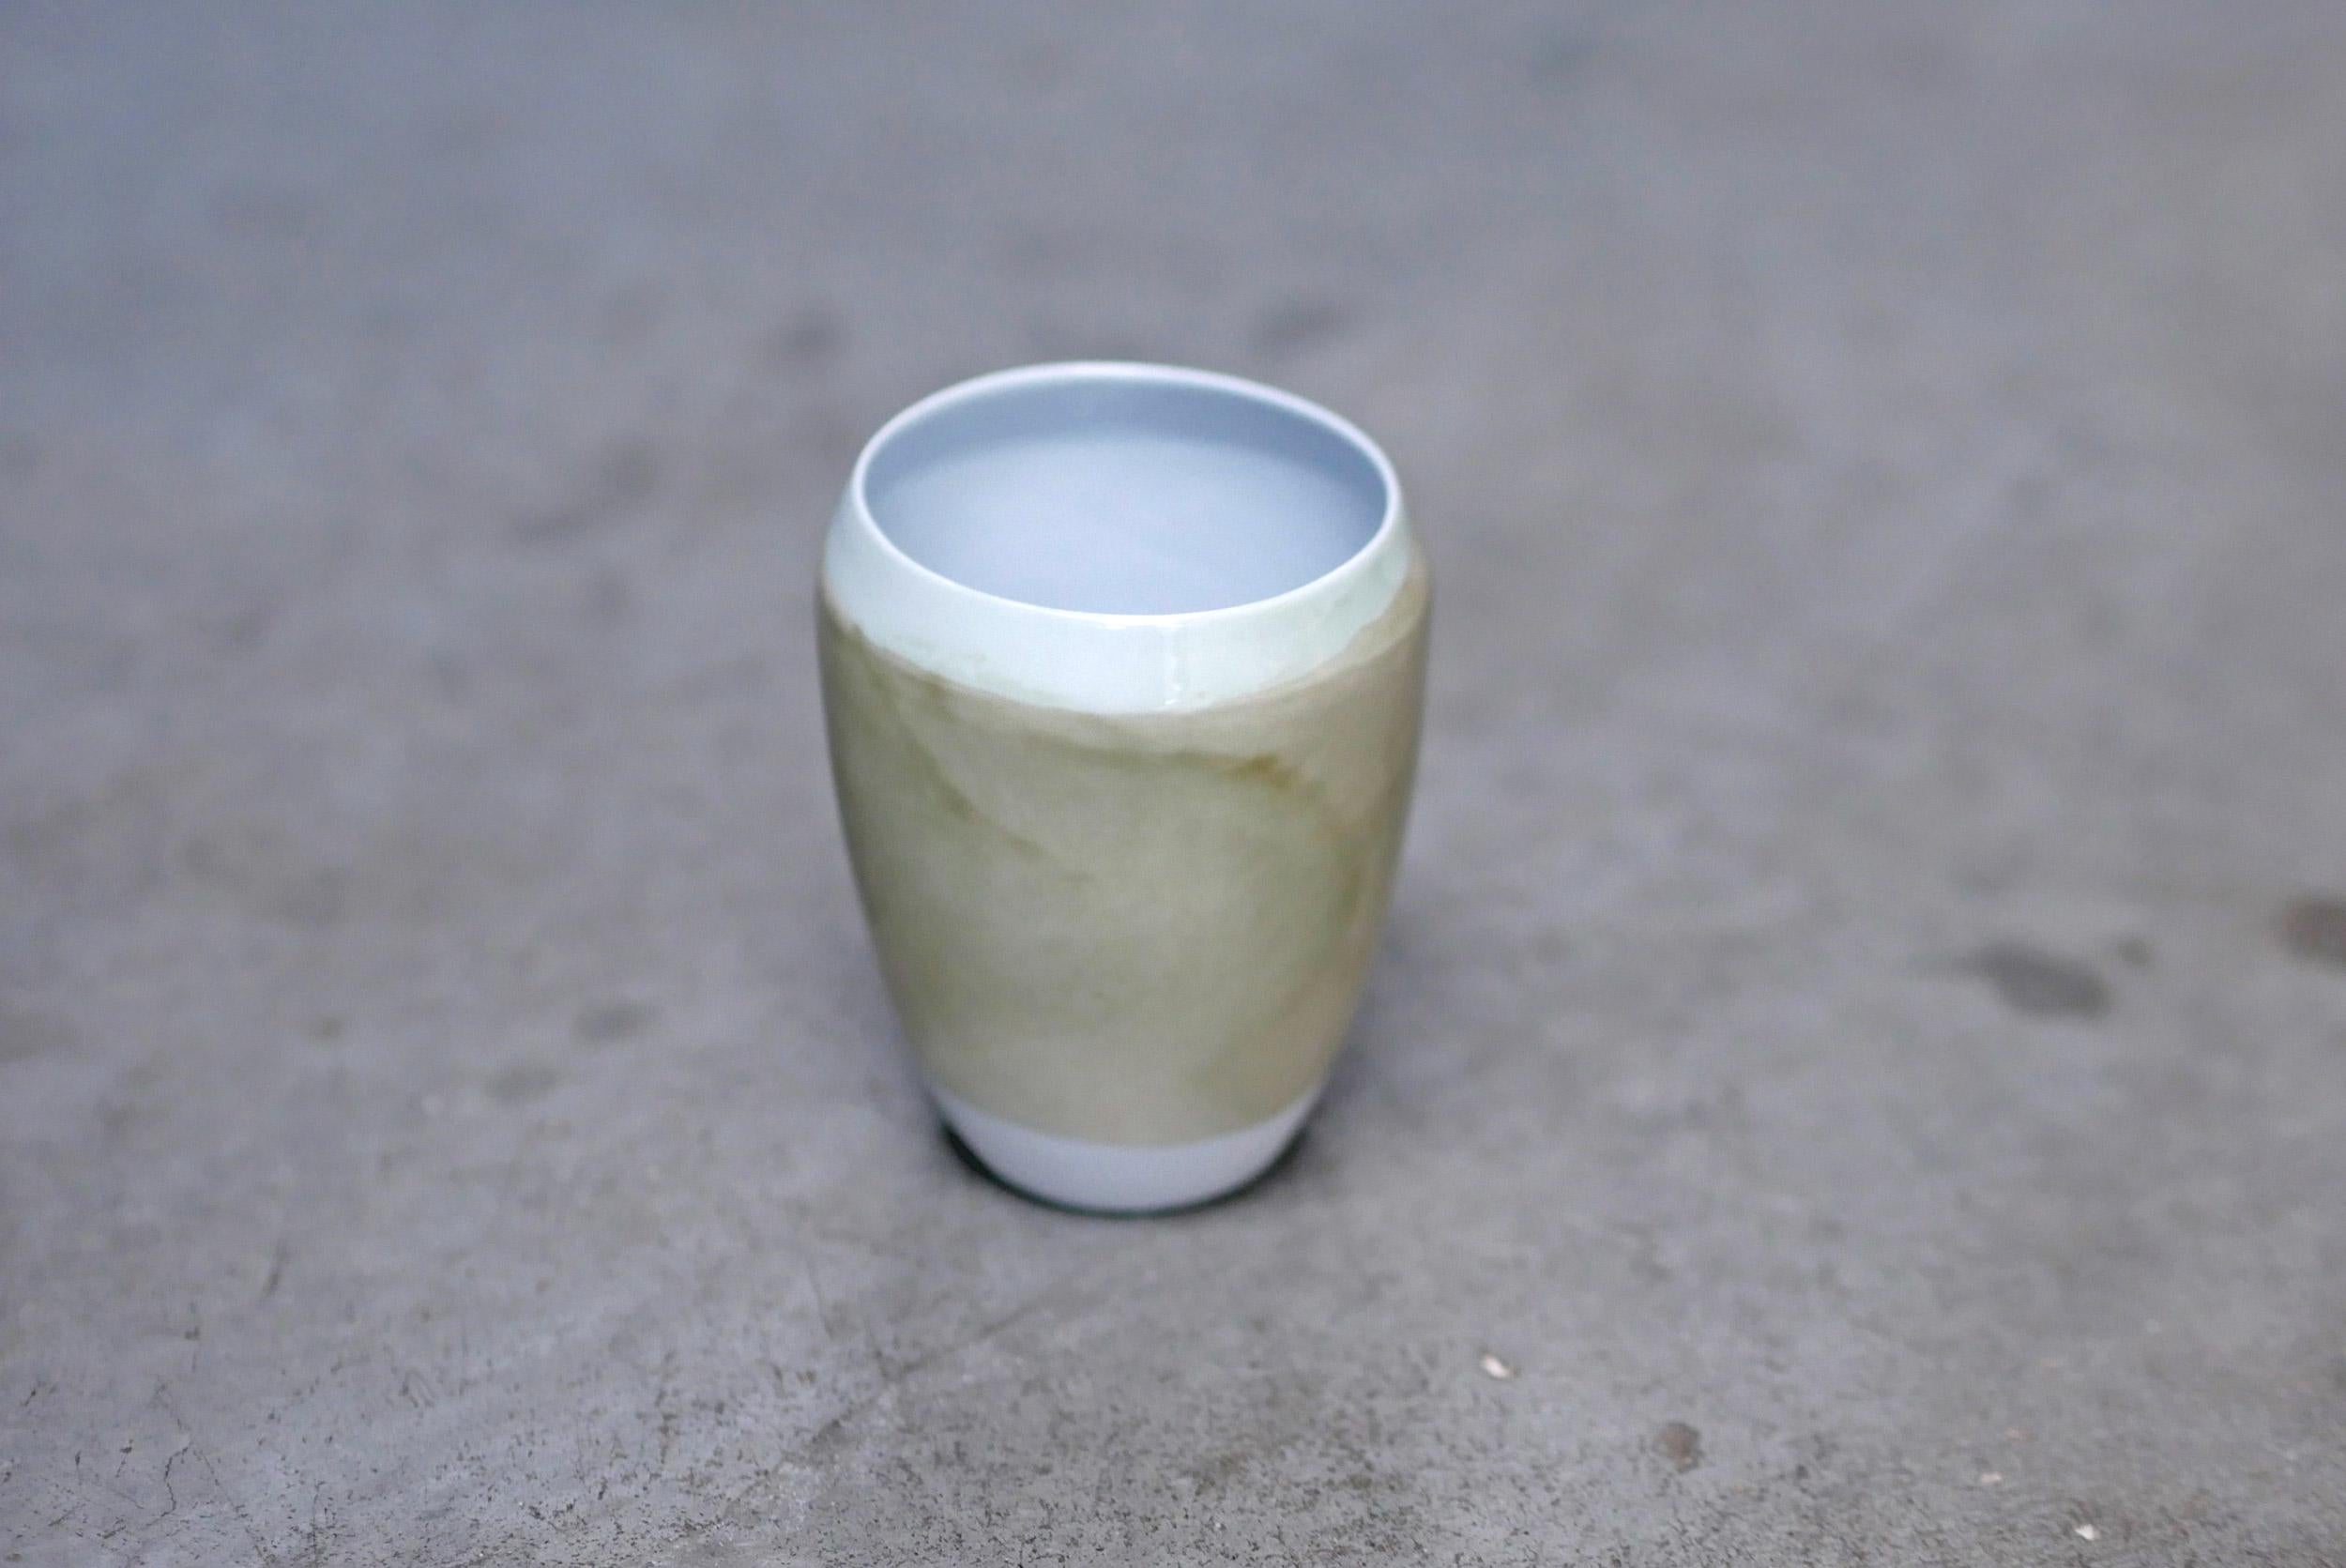 Dutch Large Porcelain Cup Ignorance is Bliss by Agne Kucerenkaite